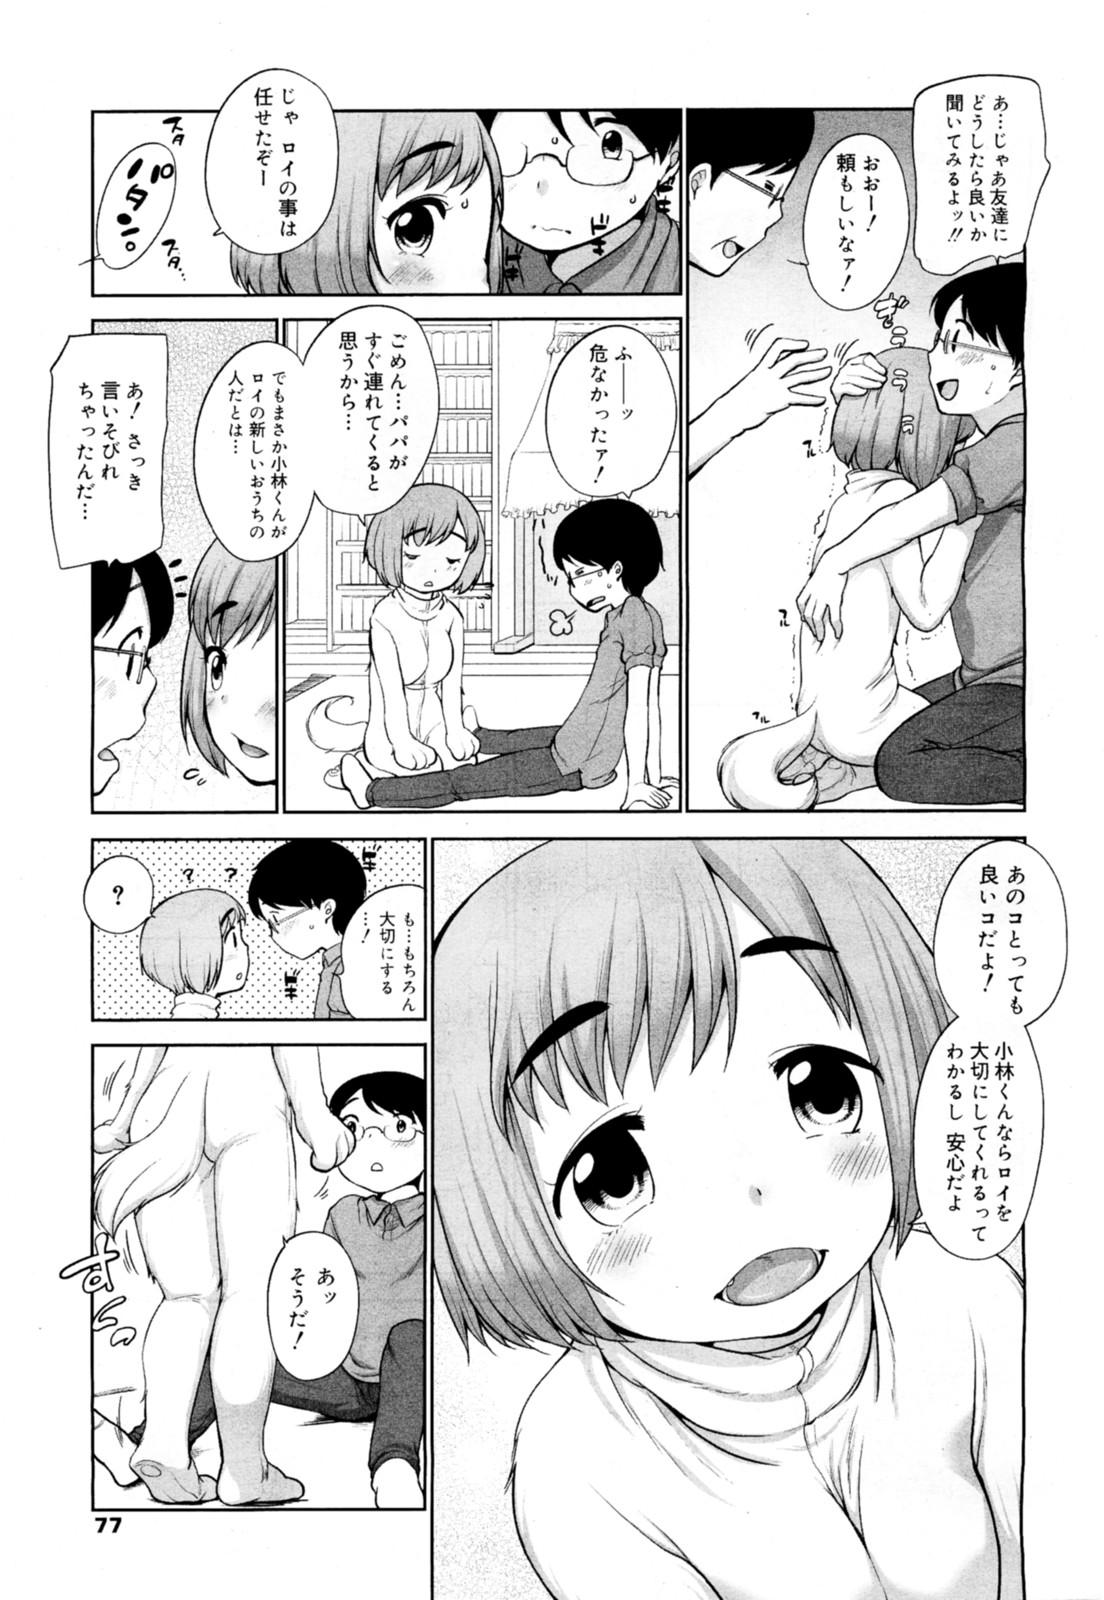 18 Year Old Inu no Kimochi？ Doublepenetration - Page 7